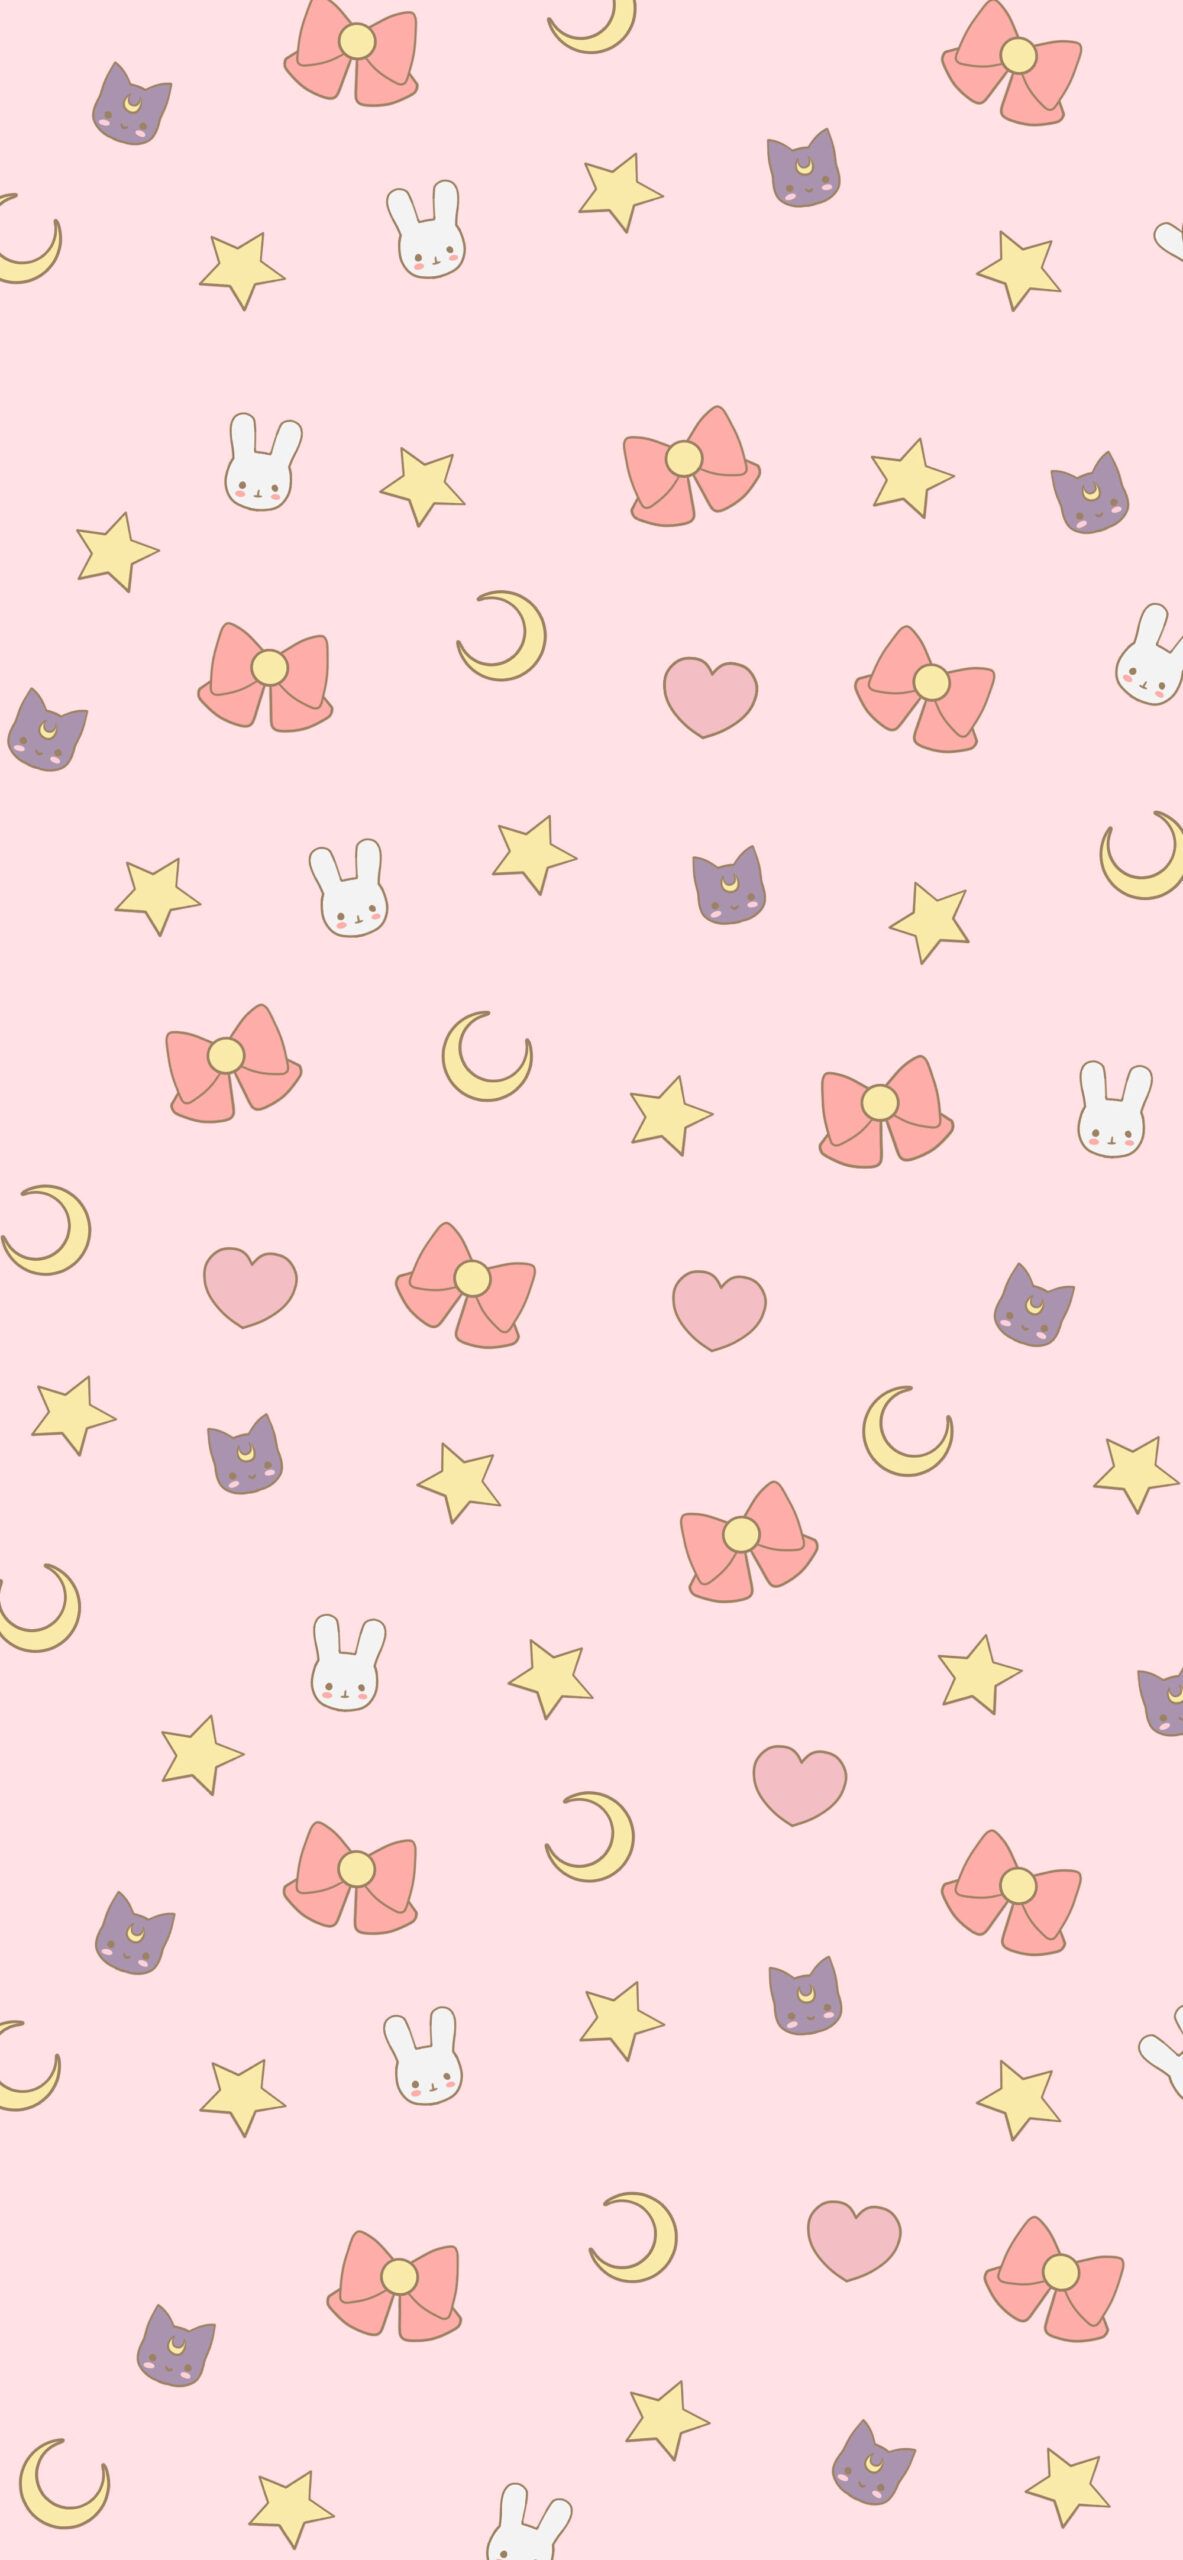 A pattern of cute little animals and stars - Moon, Sailor Moon